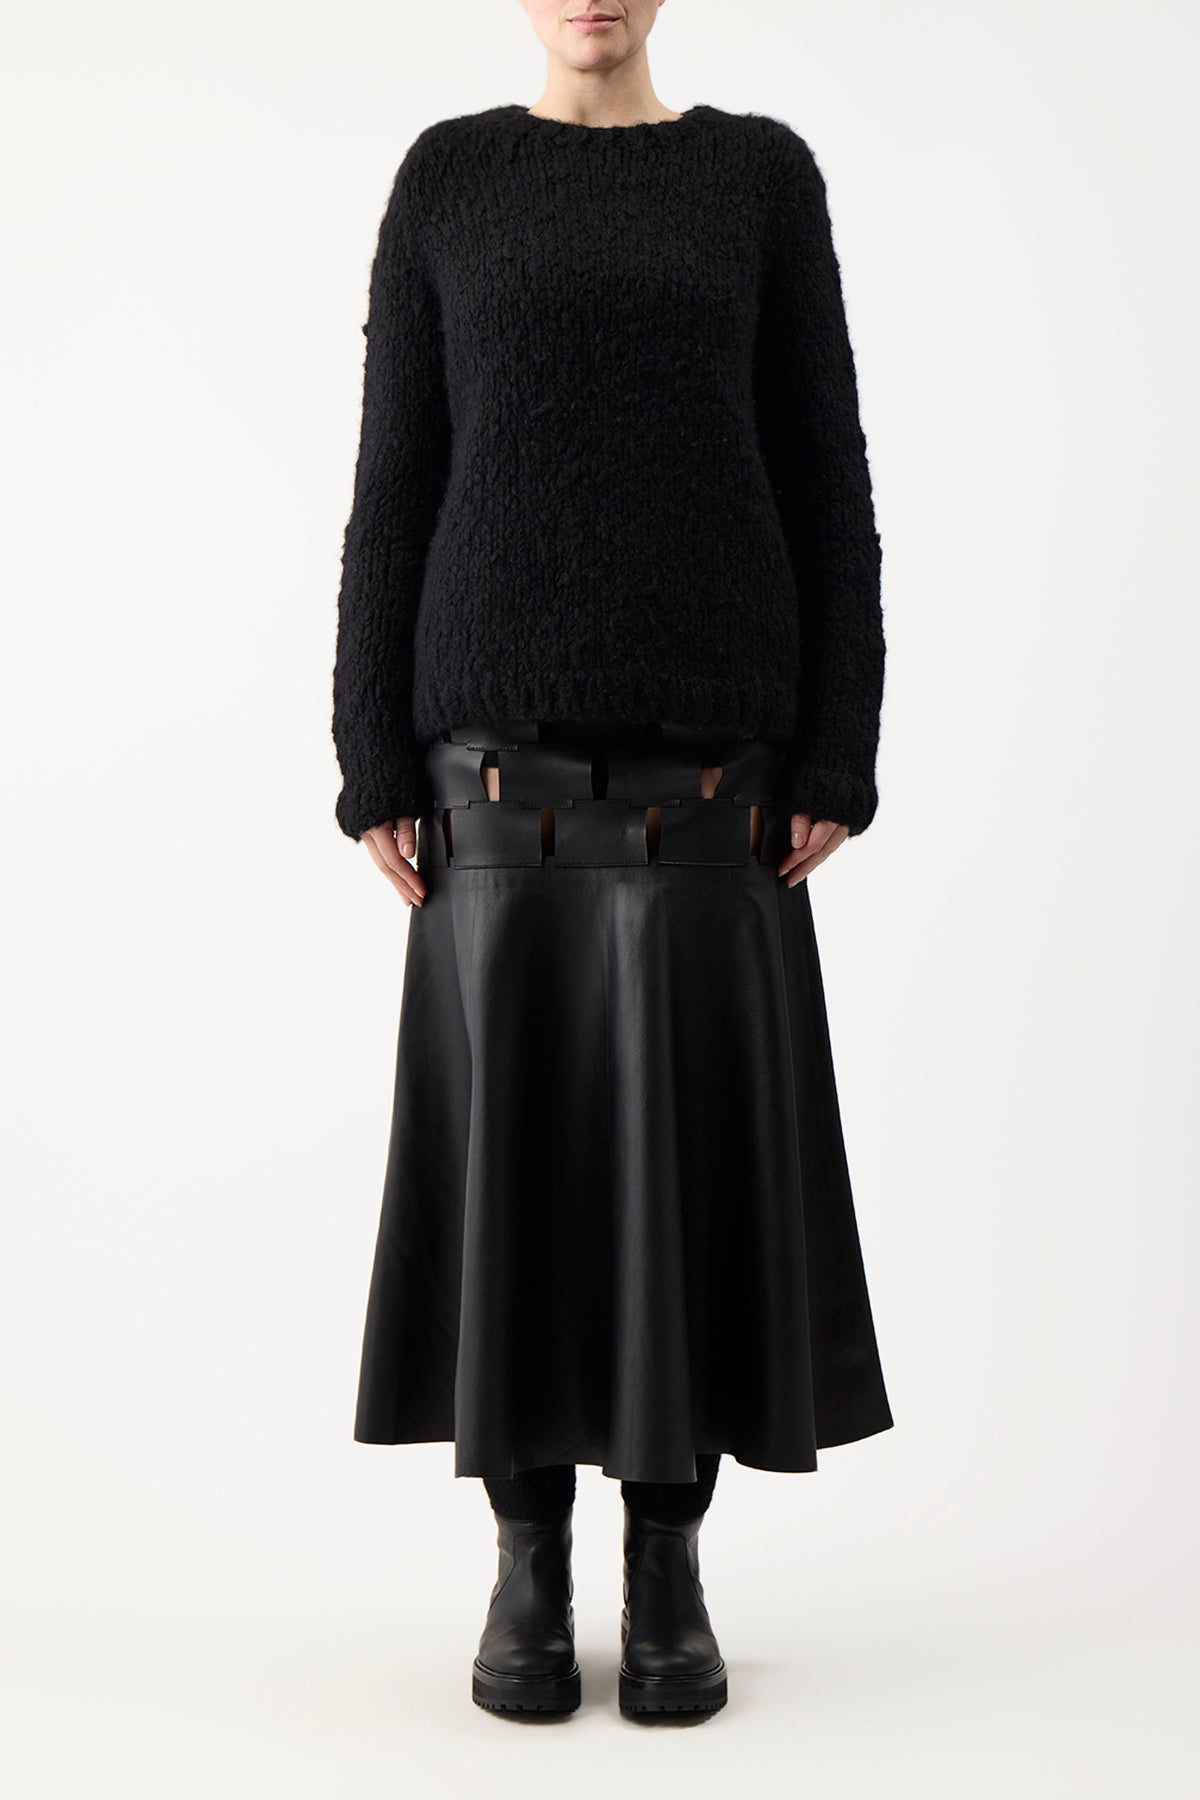 Lawrence Knit Sweater in Black Welfat Cashmere